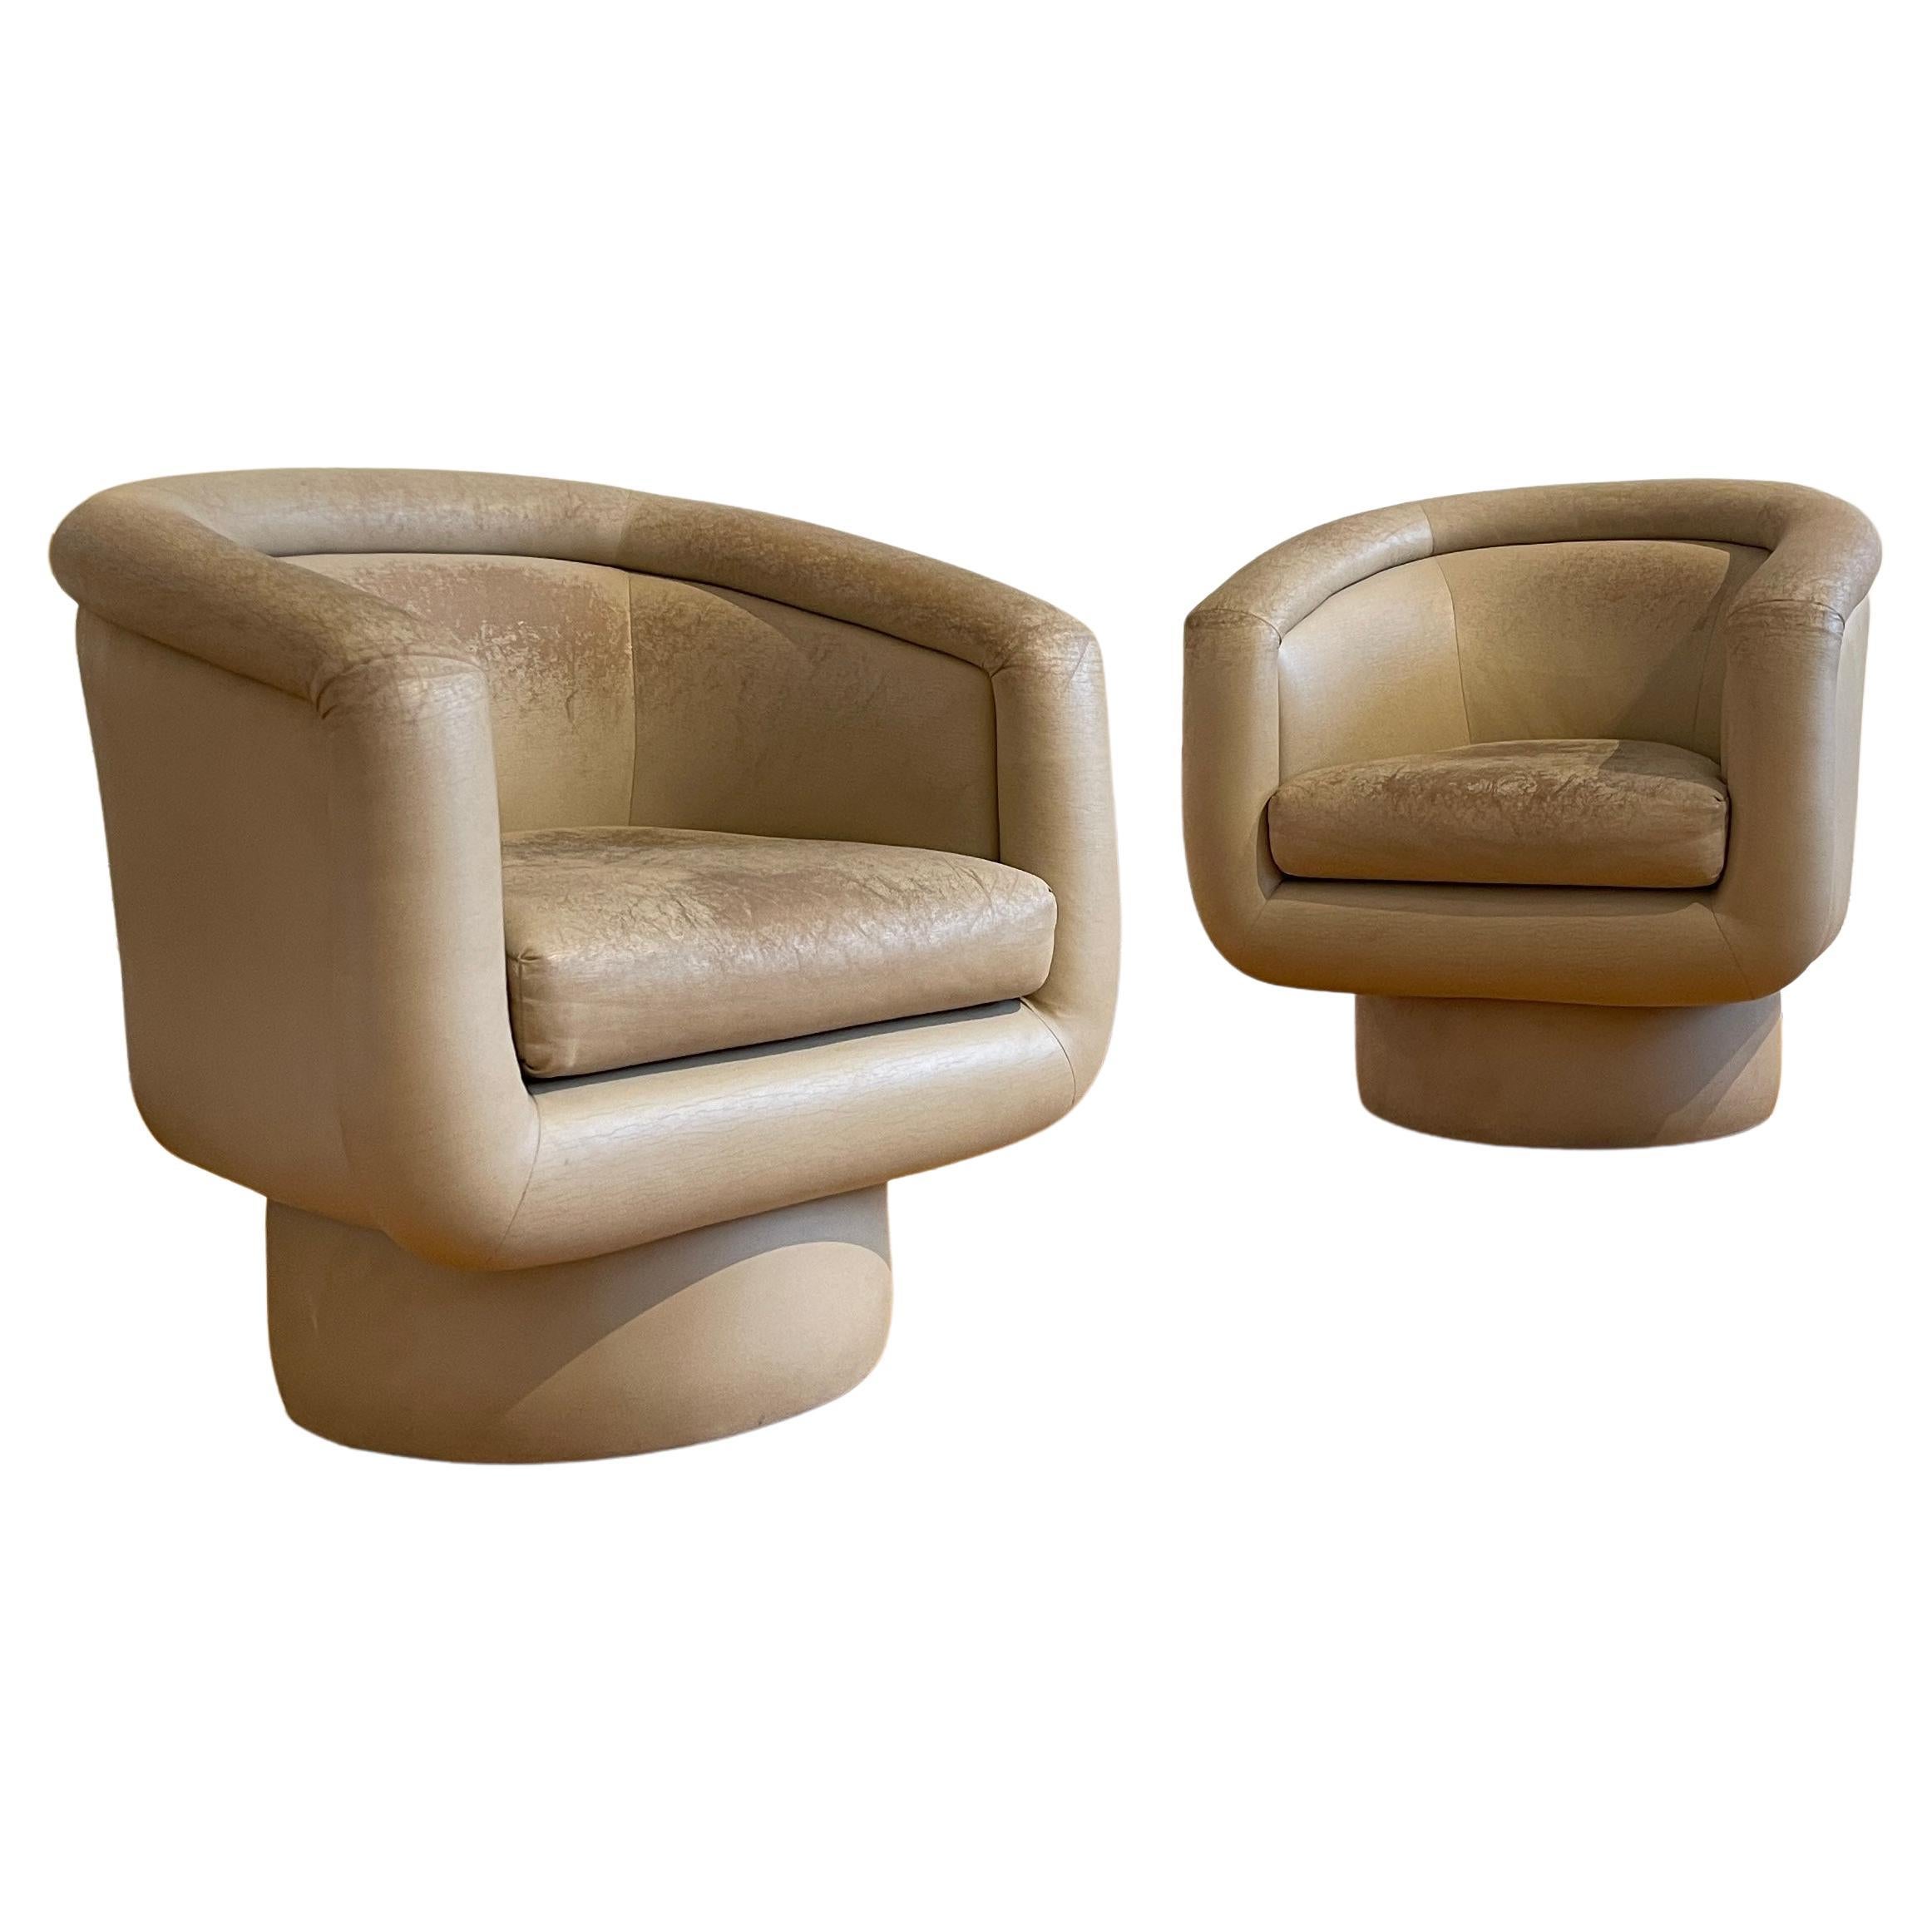 Absolutely stunning pair of postmodern swivel chair. Great comfortable height with a smooth 360 degree swivel. Upholstery has a really great looking patina and foam is good so the chairs could definitely be used as they are.